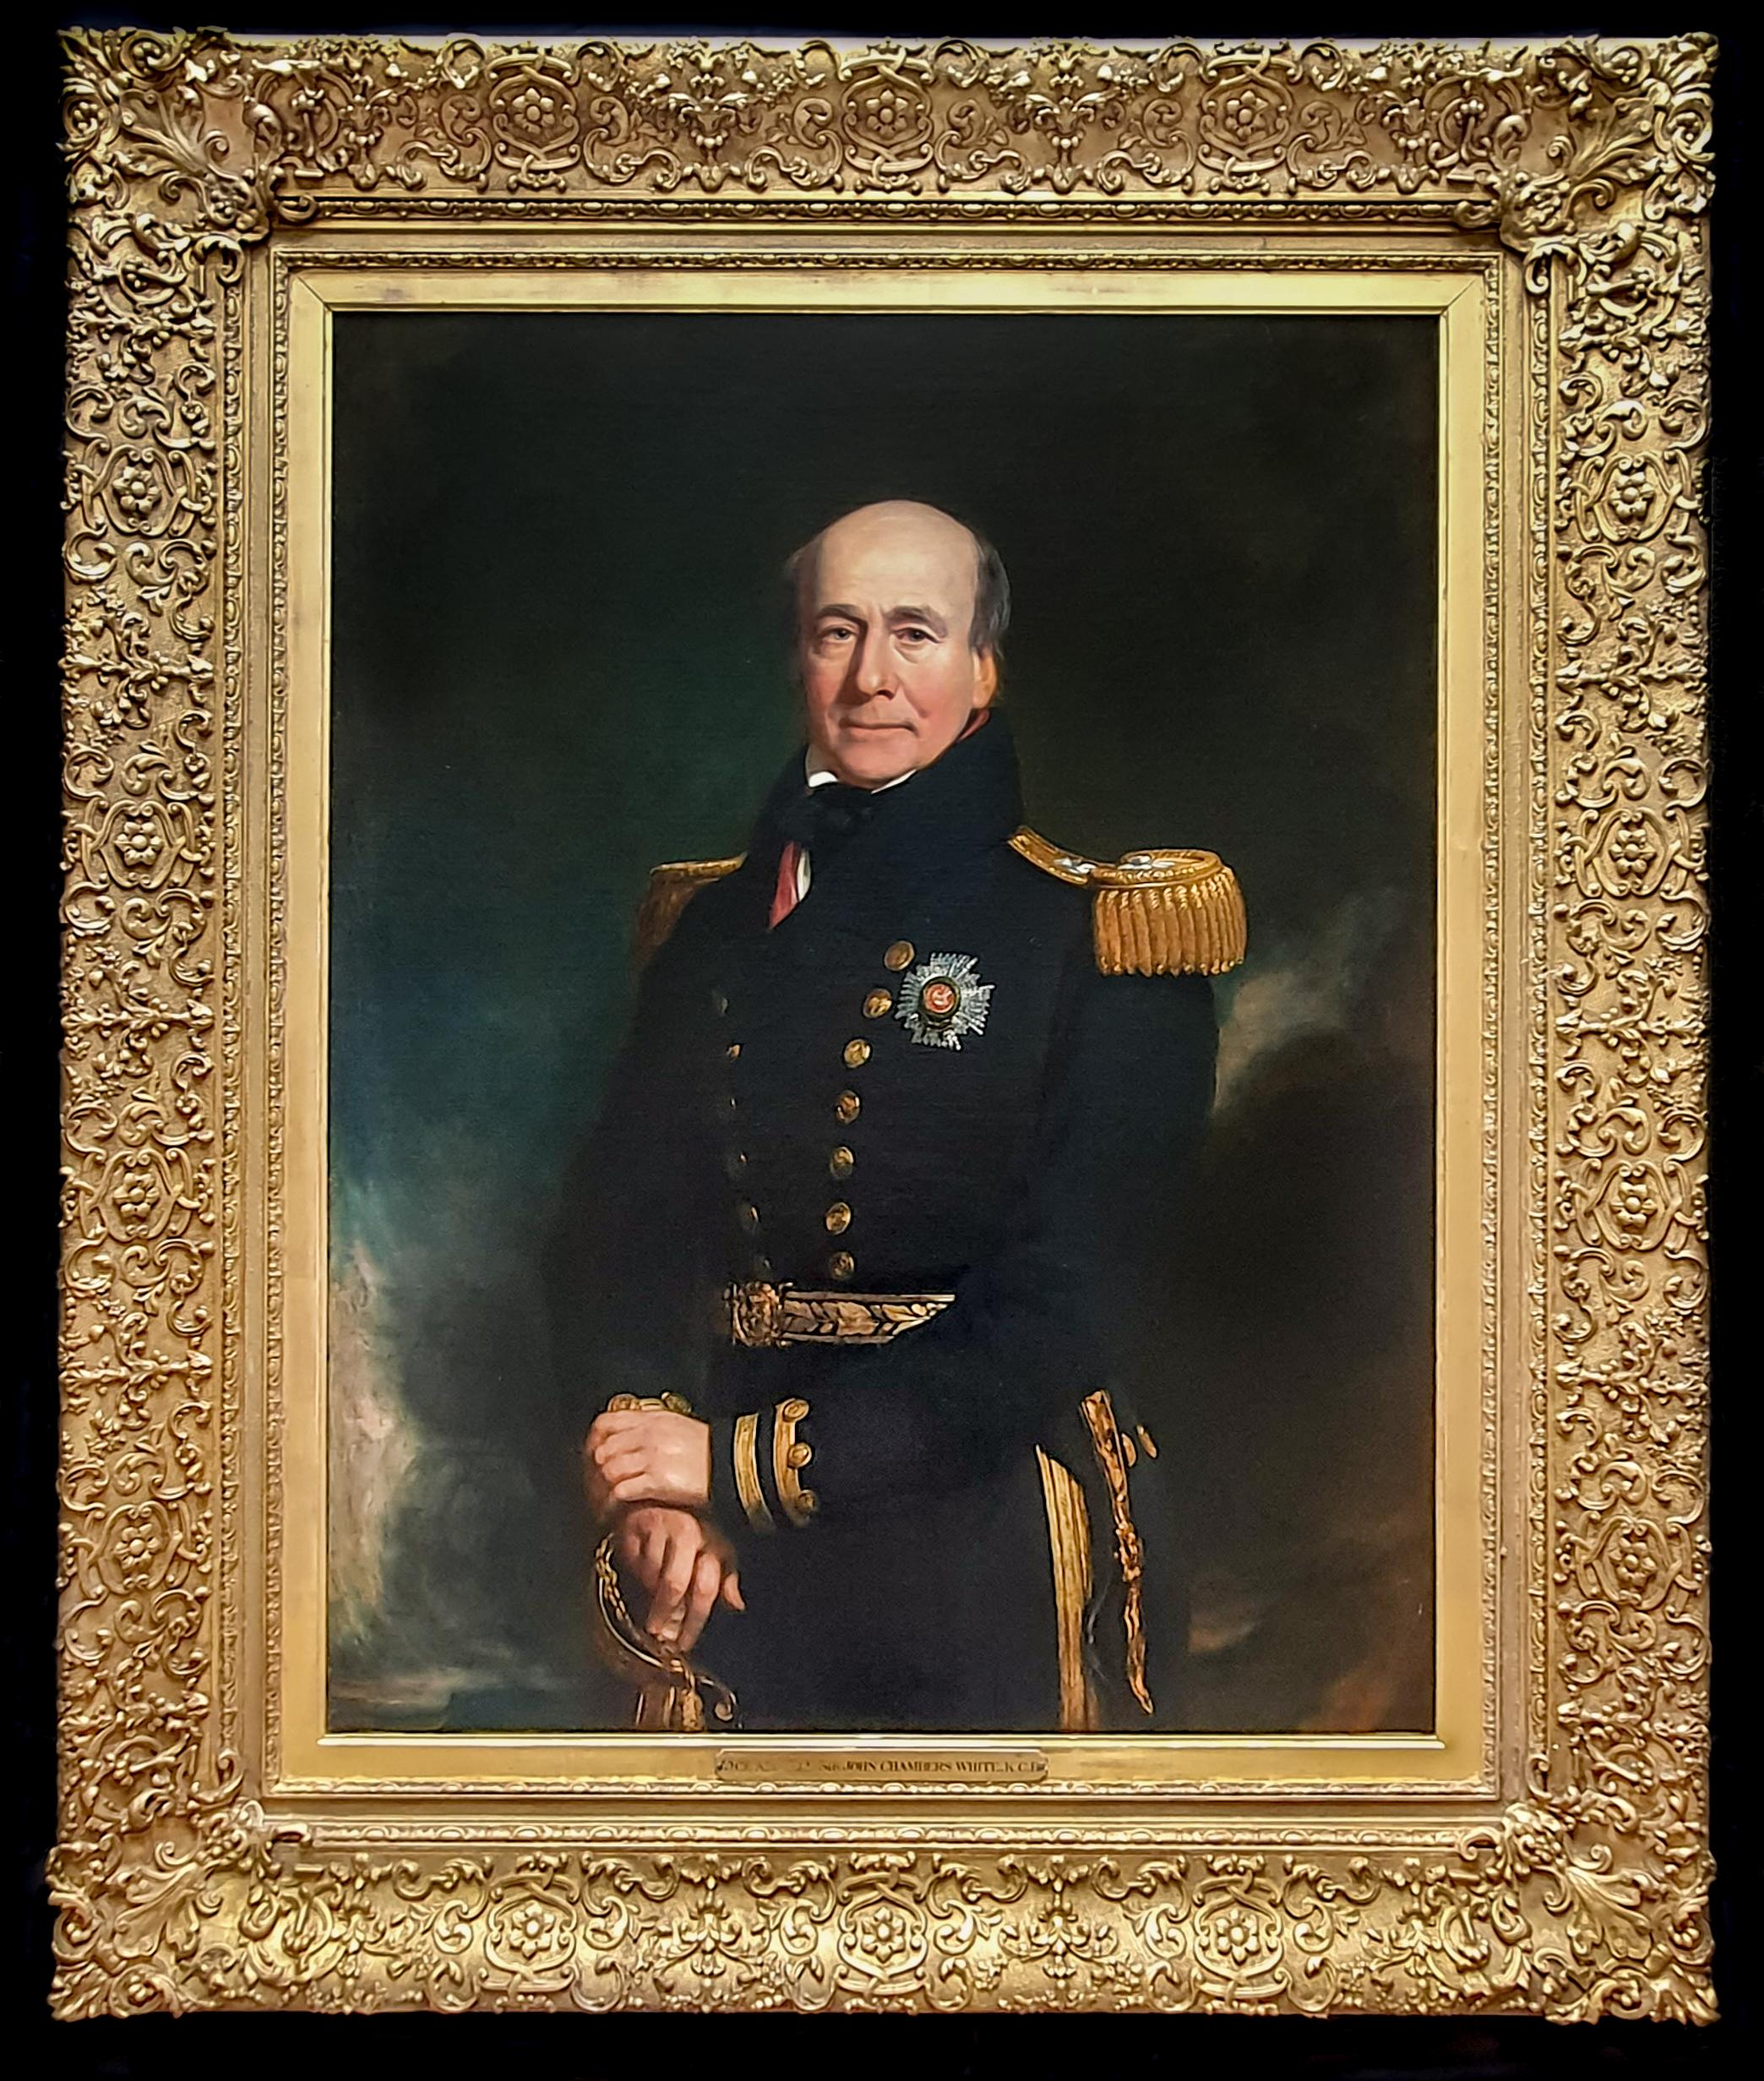 George Patten Portrait Painting - PORTRAIT of Vice Admiral Sir John Chambers White (c.1770-1845), Dated 1840